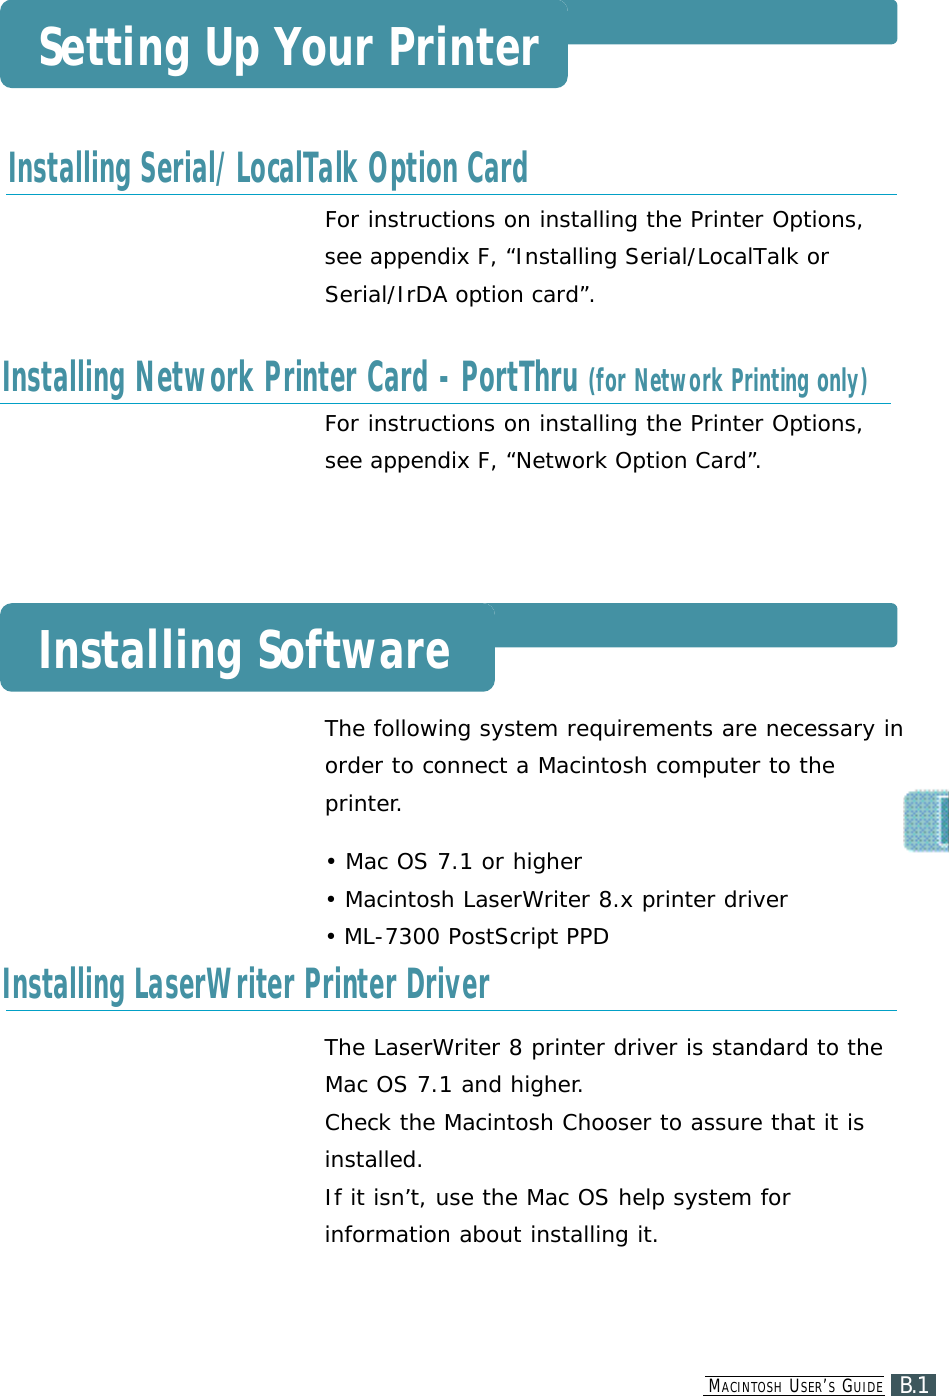 MA C I N T O S H US E R ’SGU I D EB.1Setting Up Your PrinterInstalling Serial/LocalTalk Option CardInstalling SoftwareInstalling Network Printer Card - PortThru (for Network Printing only)Installing LaserWriter Printer DriverFor instructions on installing the Printer Options, see appendix F, “Installing Serial/LocalTalk orSerial/IrDA option card”.For instructions on installing the Printer Options,see appendix F, “Network Option Card”.The following system requirements are necessary inorder to connect a Macintosh computer to theprinter.• Mac OS 7.1 or higher• Macintosh LaserWriter 8.x printer driver• ML-7300 PostScript PPDThe LaserWriter 8 printer driver is standard to theMac OS 7.1 and higher.Check the Macintosh Chooser to assure that it isinstalled. If it isn’t, use the Mac OS help system forinformation about installing it.